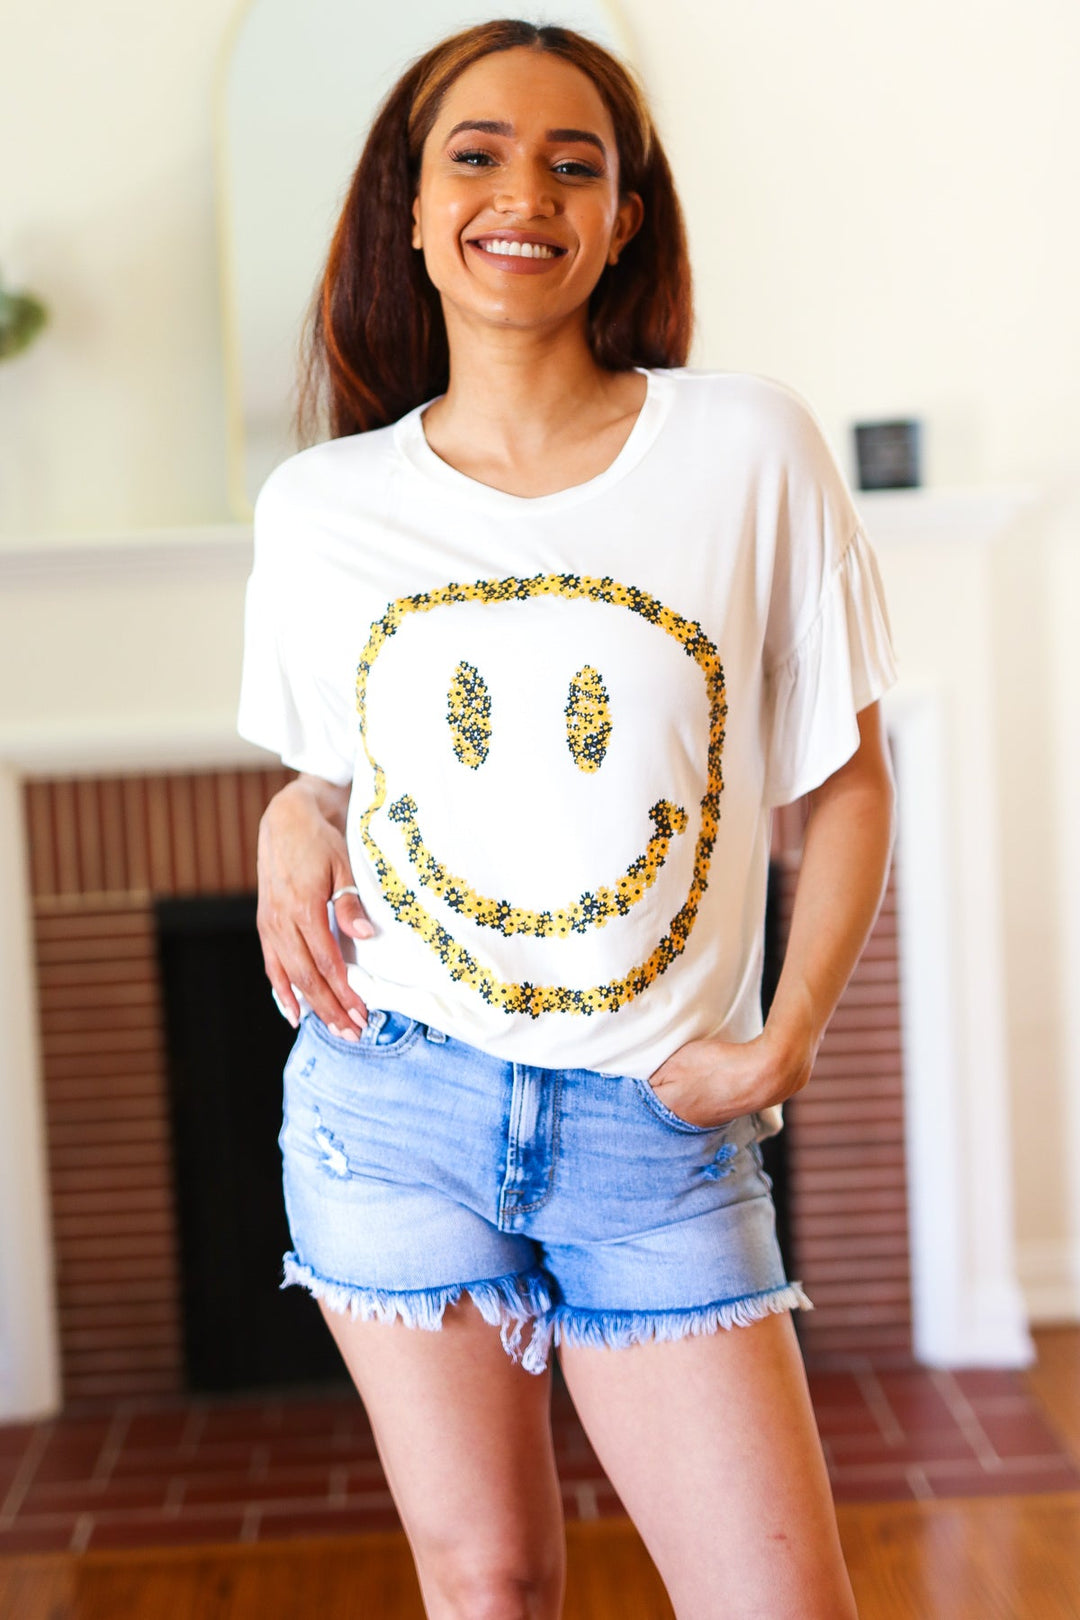 Good Times - Smiley Face Flutter-Sleeve Top - White